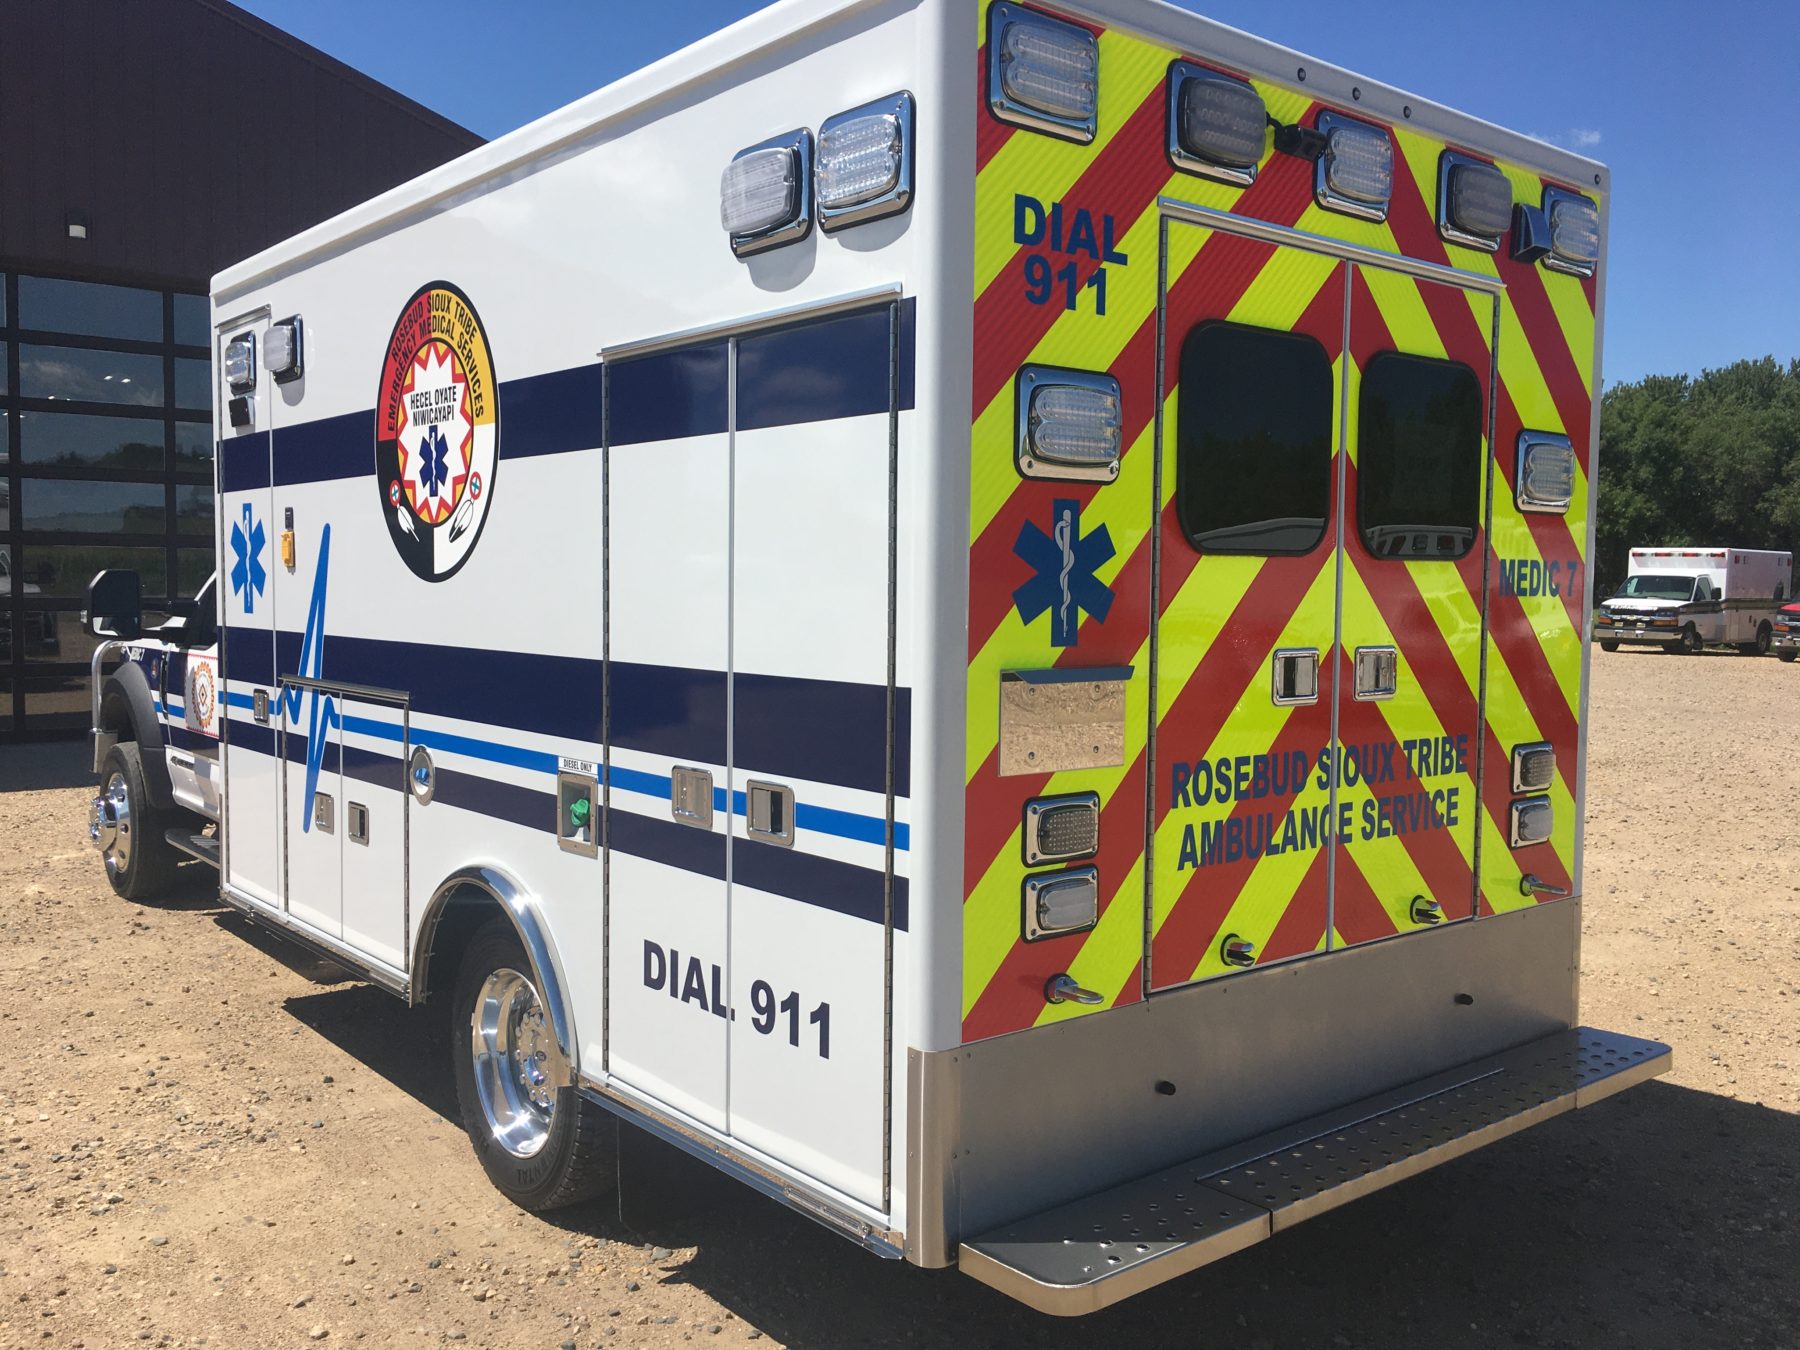 2020 Ford F450 4x4 Heavy Duty Ambulance For Sale – Picture 5